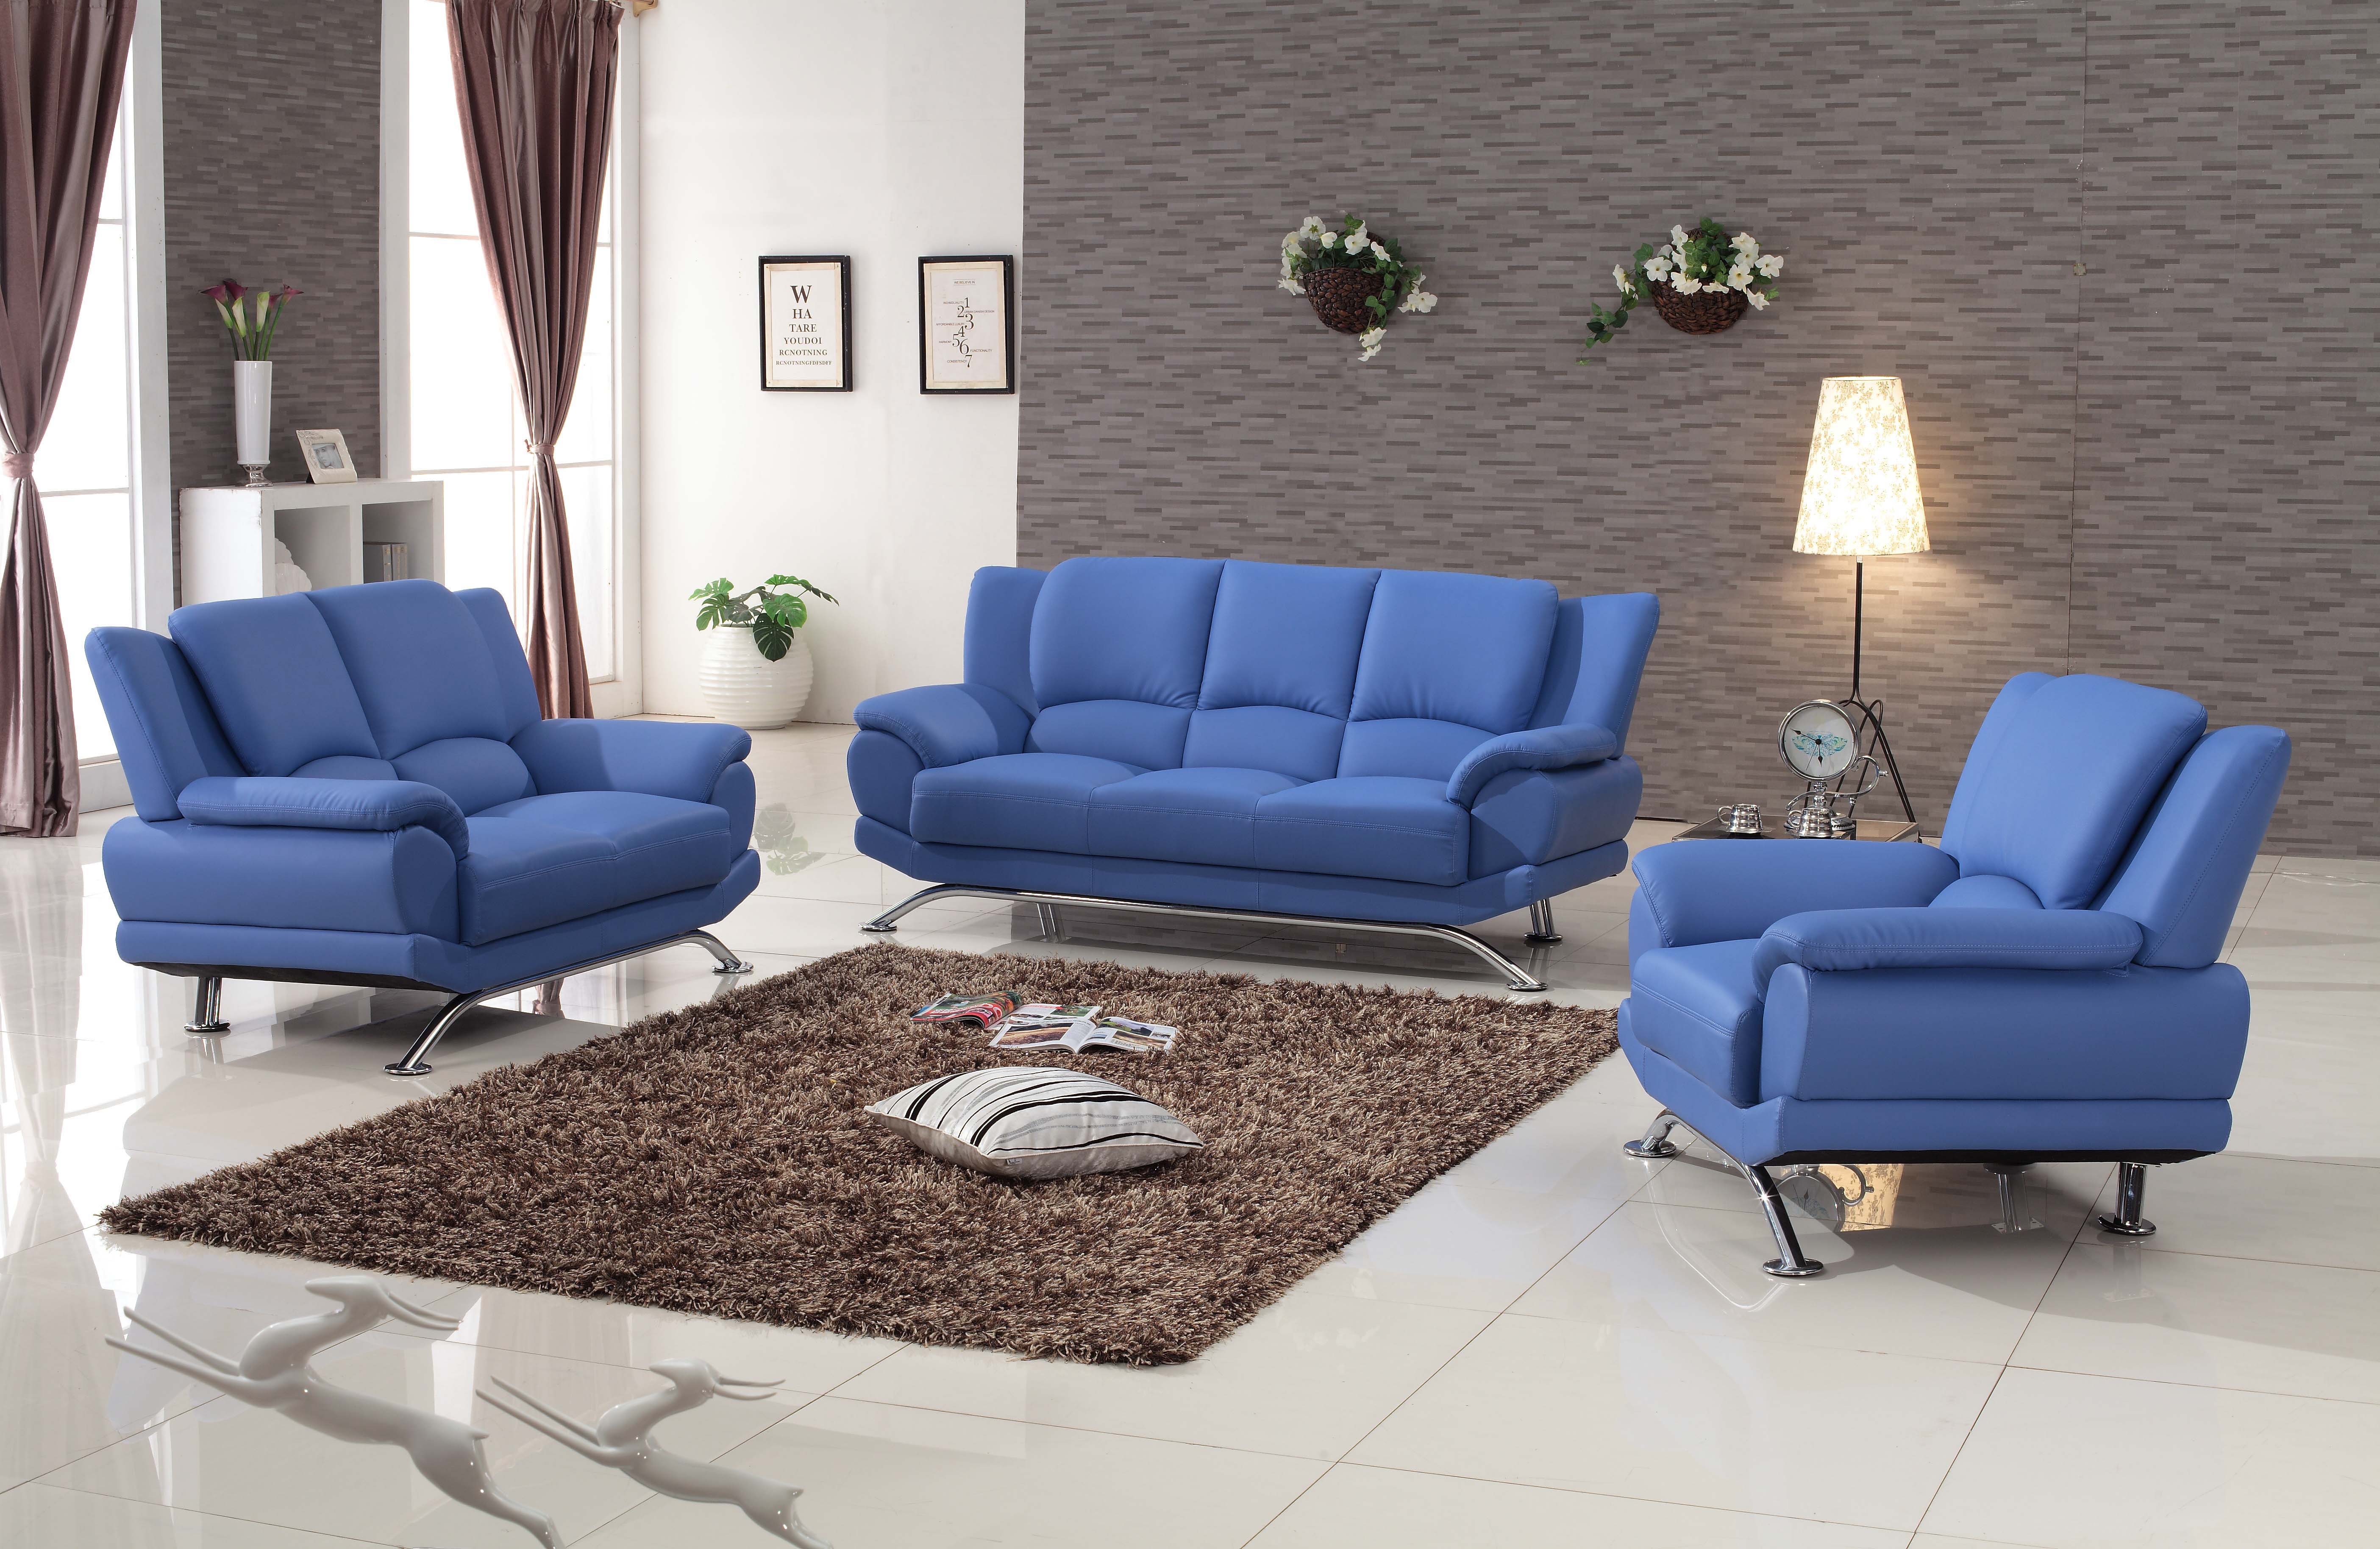 Milano Modern Leather Sofa Set Blue, Living Rooms With Blue Leather Sofas